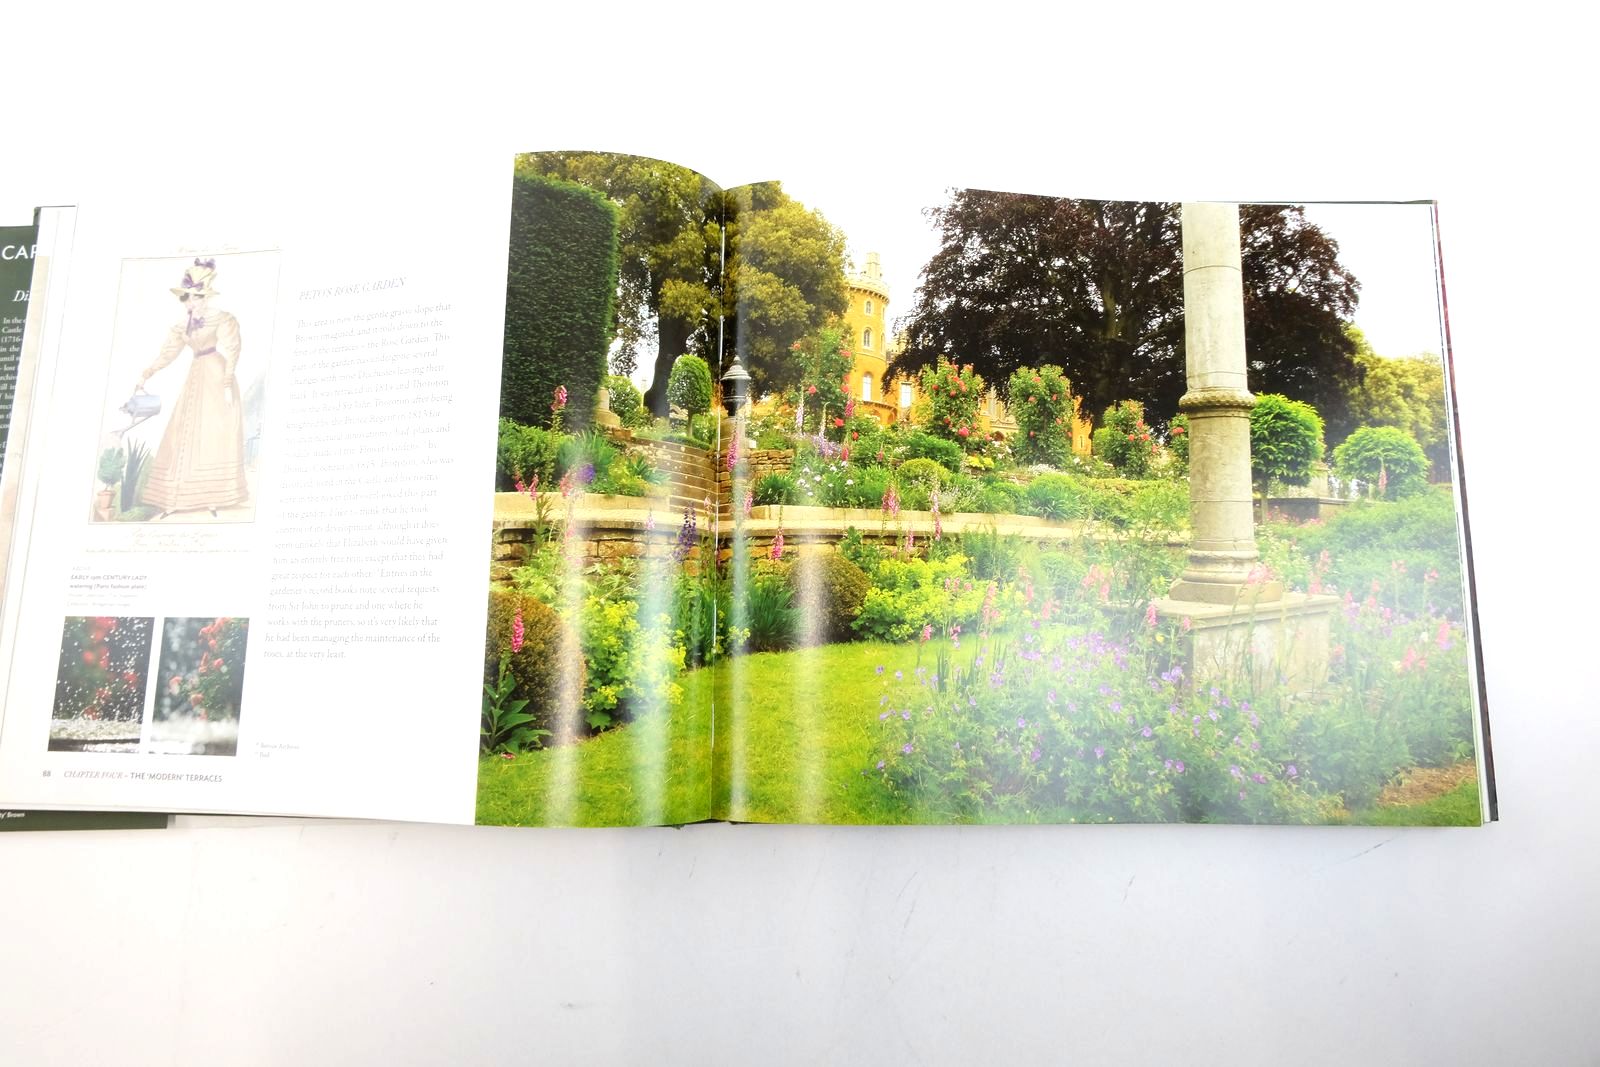 Photo of CAPABILITY BROWN & BELVOIR: DISCOVERING A LOST LANDSCAPE written by Rutland, Duchess of
Pruden, Jane
Titchmarsh, Alan published by Nick McCann Associates Ltd (STOCK CODE: 2135362)  for sale by Stella & Rose's Books